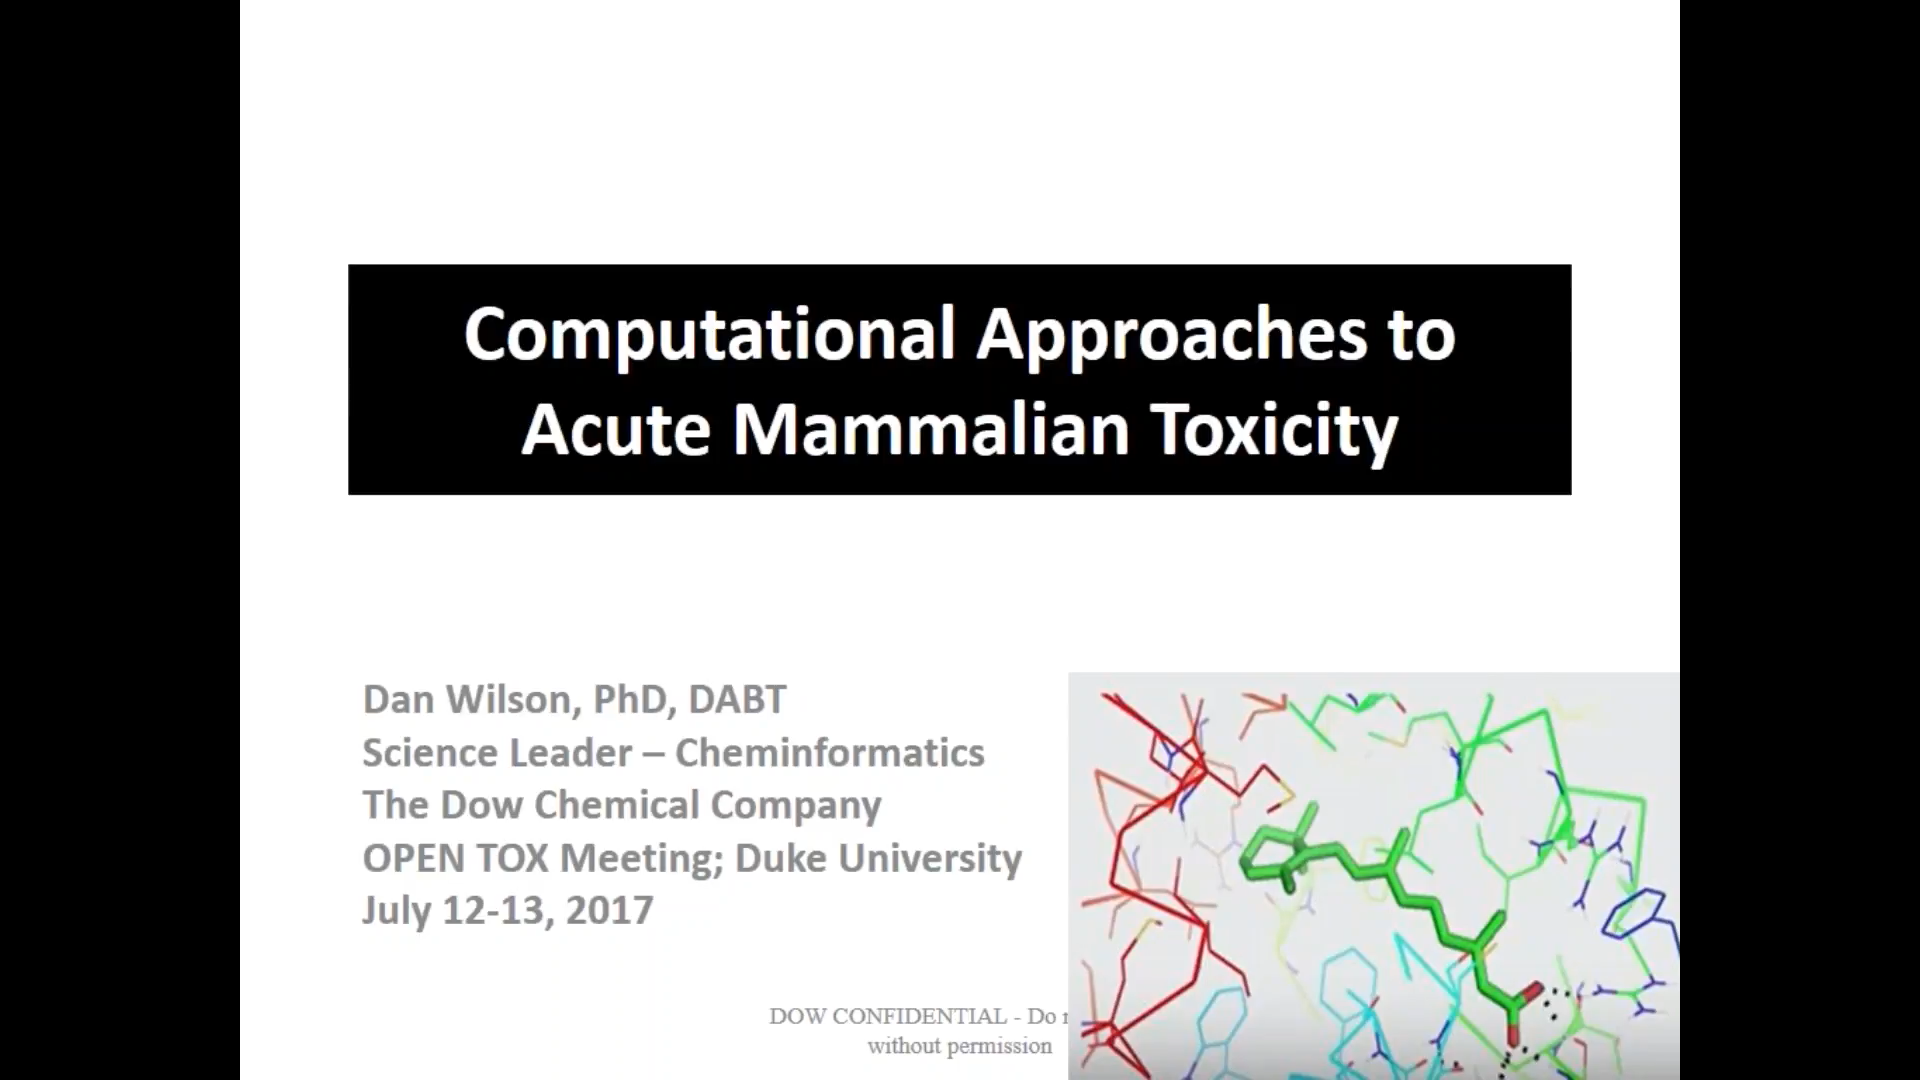 Computational Approaches To Acute Mammalian Systemic Toxicity